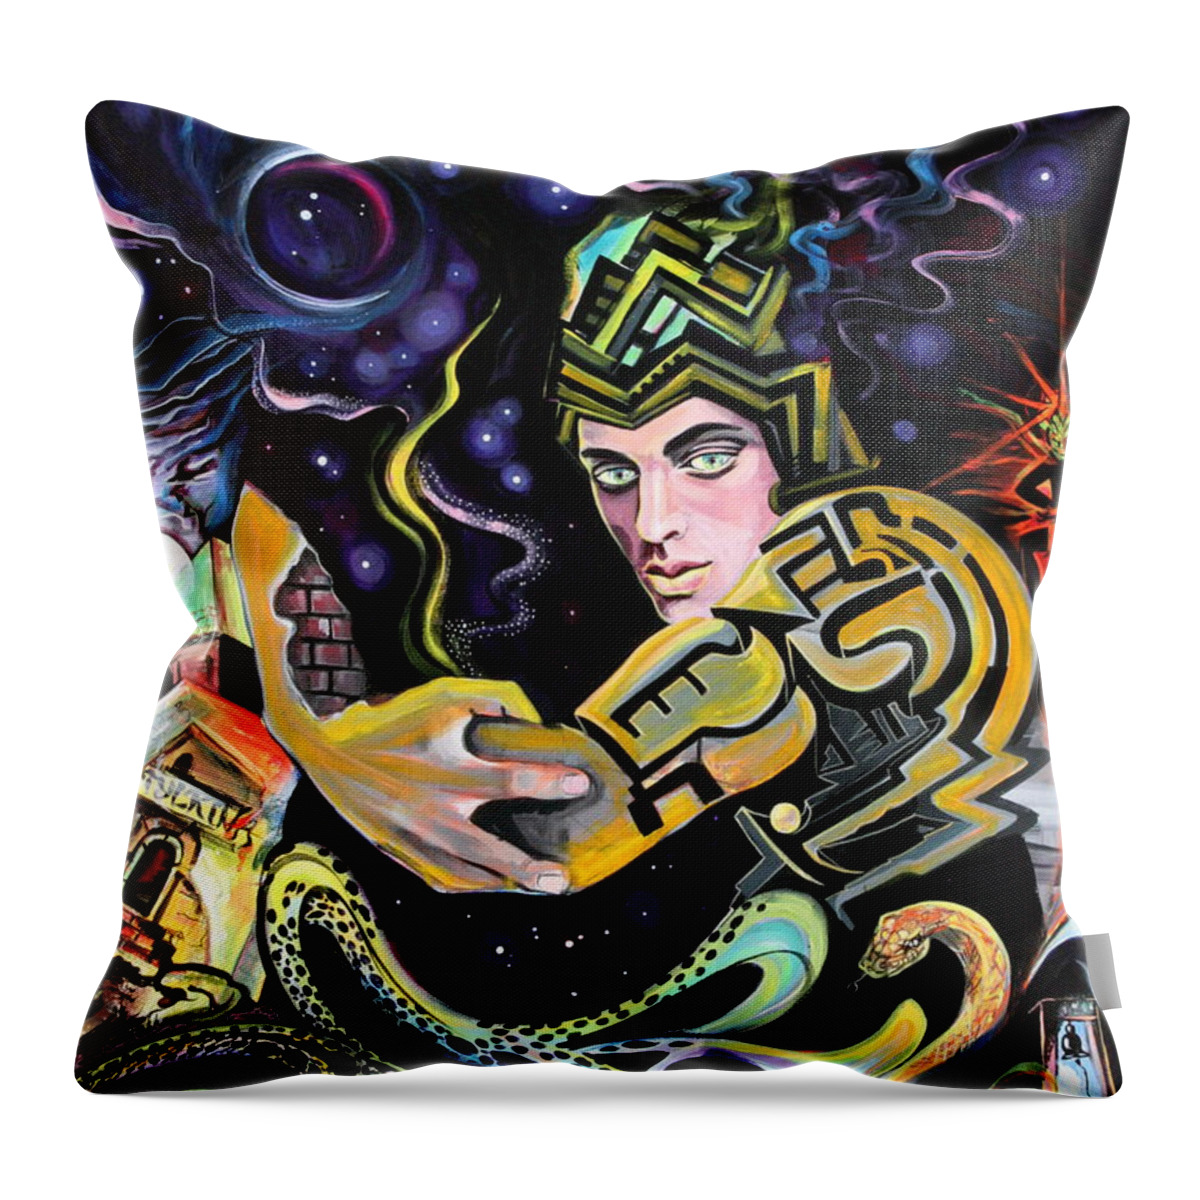 Surreal Throw Pillow featuring the painting Deep Space Eleven by Yelena Tylkina